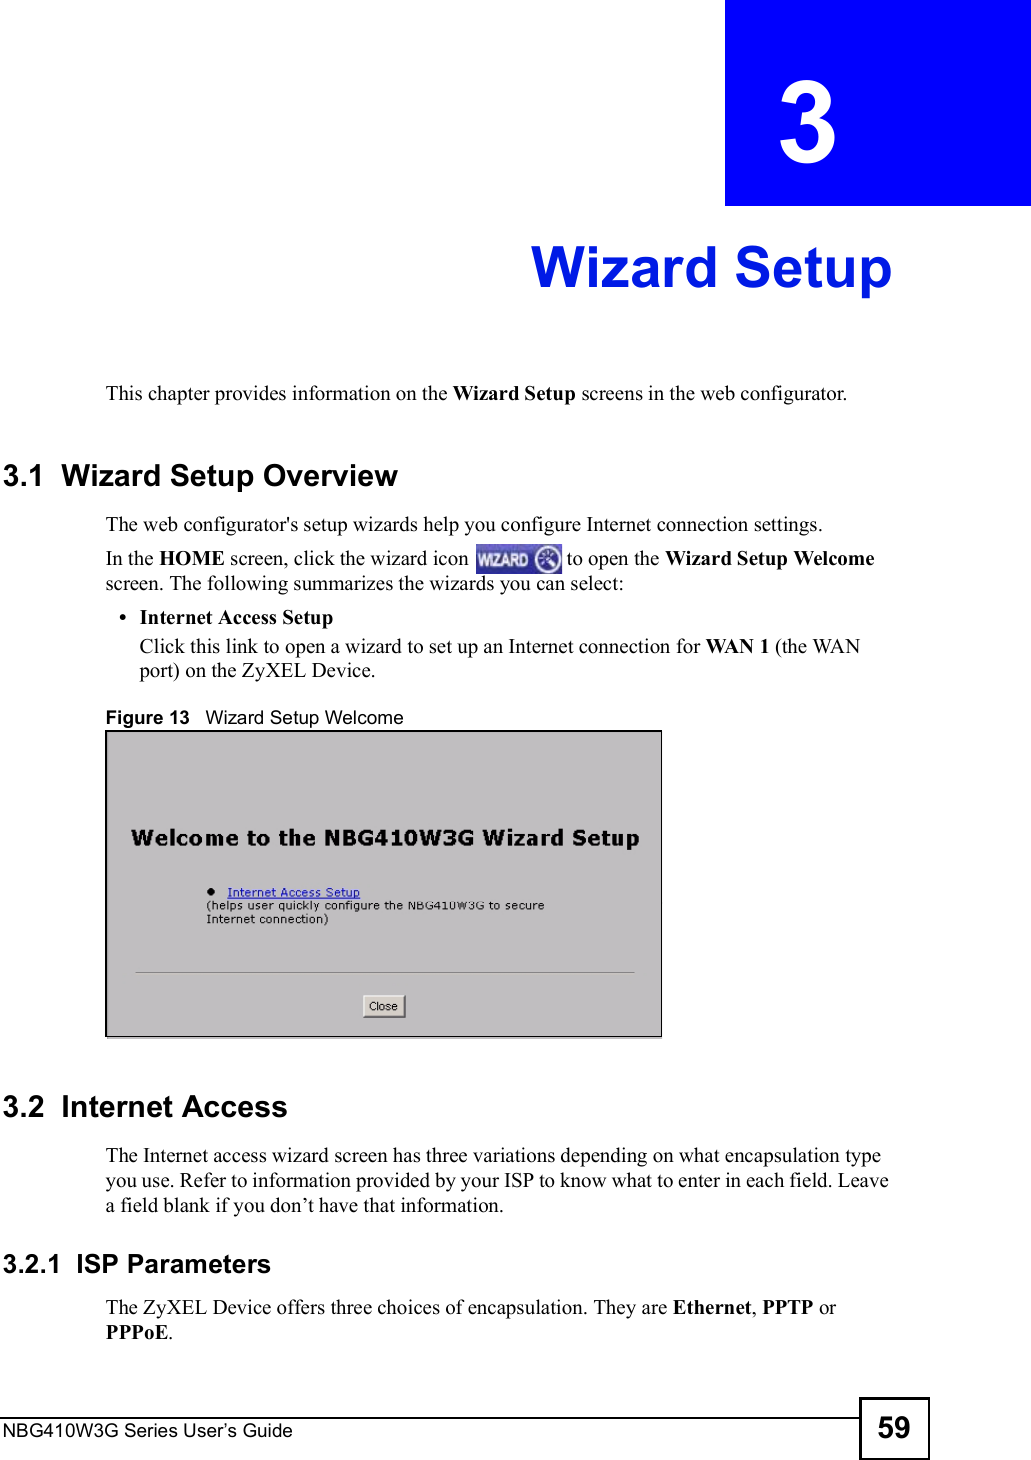 NBG410W3G Series User s Guide 59CHAPTER  3 Wizard SetupThis chapter provides information on the Wizard Setup screens in the web configurator. 3.1  Wizard Setup Overview The web configurator&apos;s setup wizards help you configure Internet connection settings.In the HOME screen, click the wizard icon   to open the Wizard Setup Welcome screen. The following summarizes the wizards you can select: Internet Access SetupClick this link to open a wizard to set up an Internet connection for WAN 1 (the WAN port) on the ZyXEL Device. Figure 13   Wizard Setup Welcome3.2  Internet Access The Internet access wizard screen has three variations depending on what encapsulation type you use. Refer to information provided by your ISP to know what to enter in each field. Leave a field blank if you don!t have that information.3.2.1  ISP ParametersThe ZyXEL Device offers three choices of encapsulation. They are Ethernet, PPTP or PPPoE. 